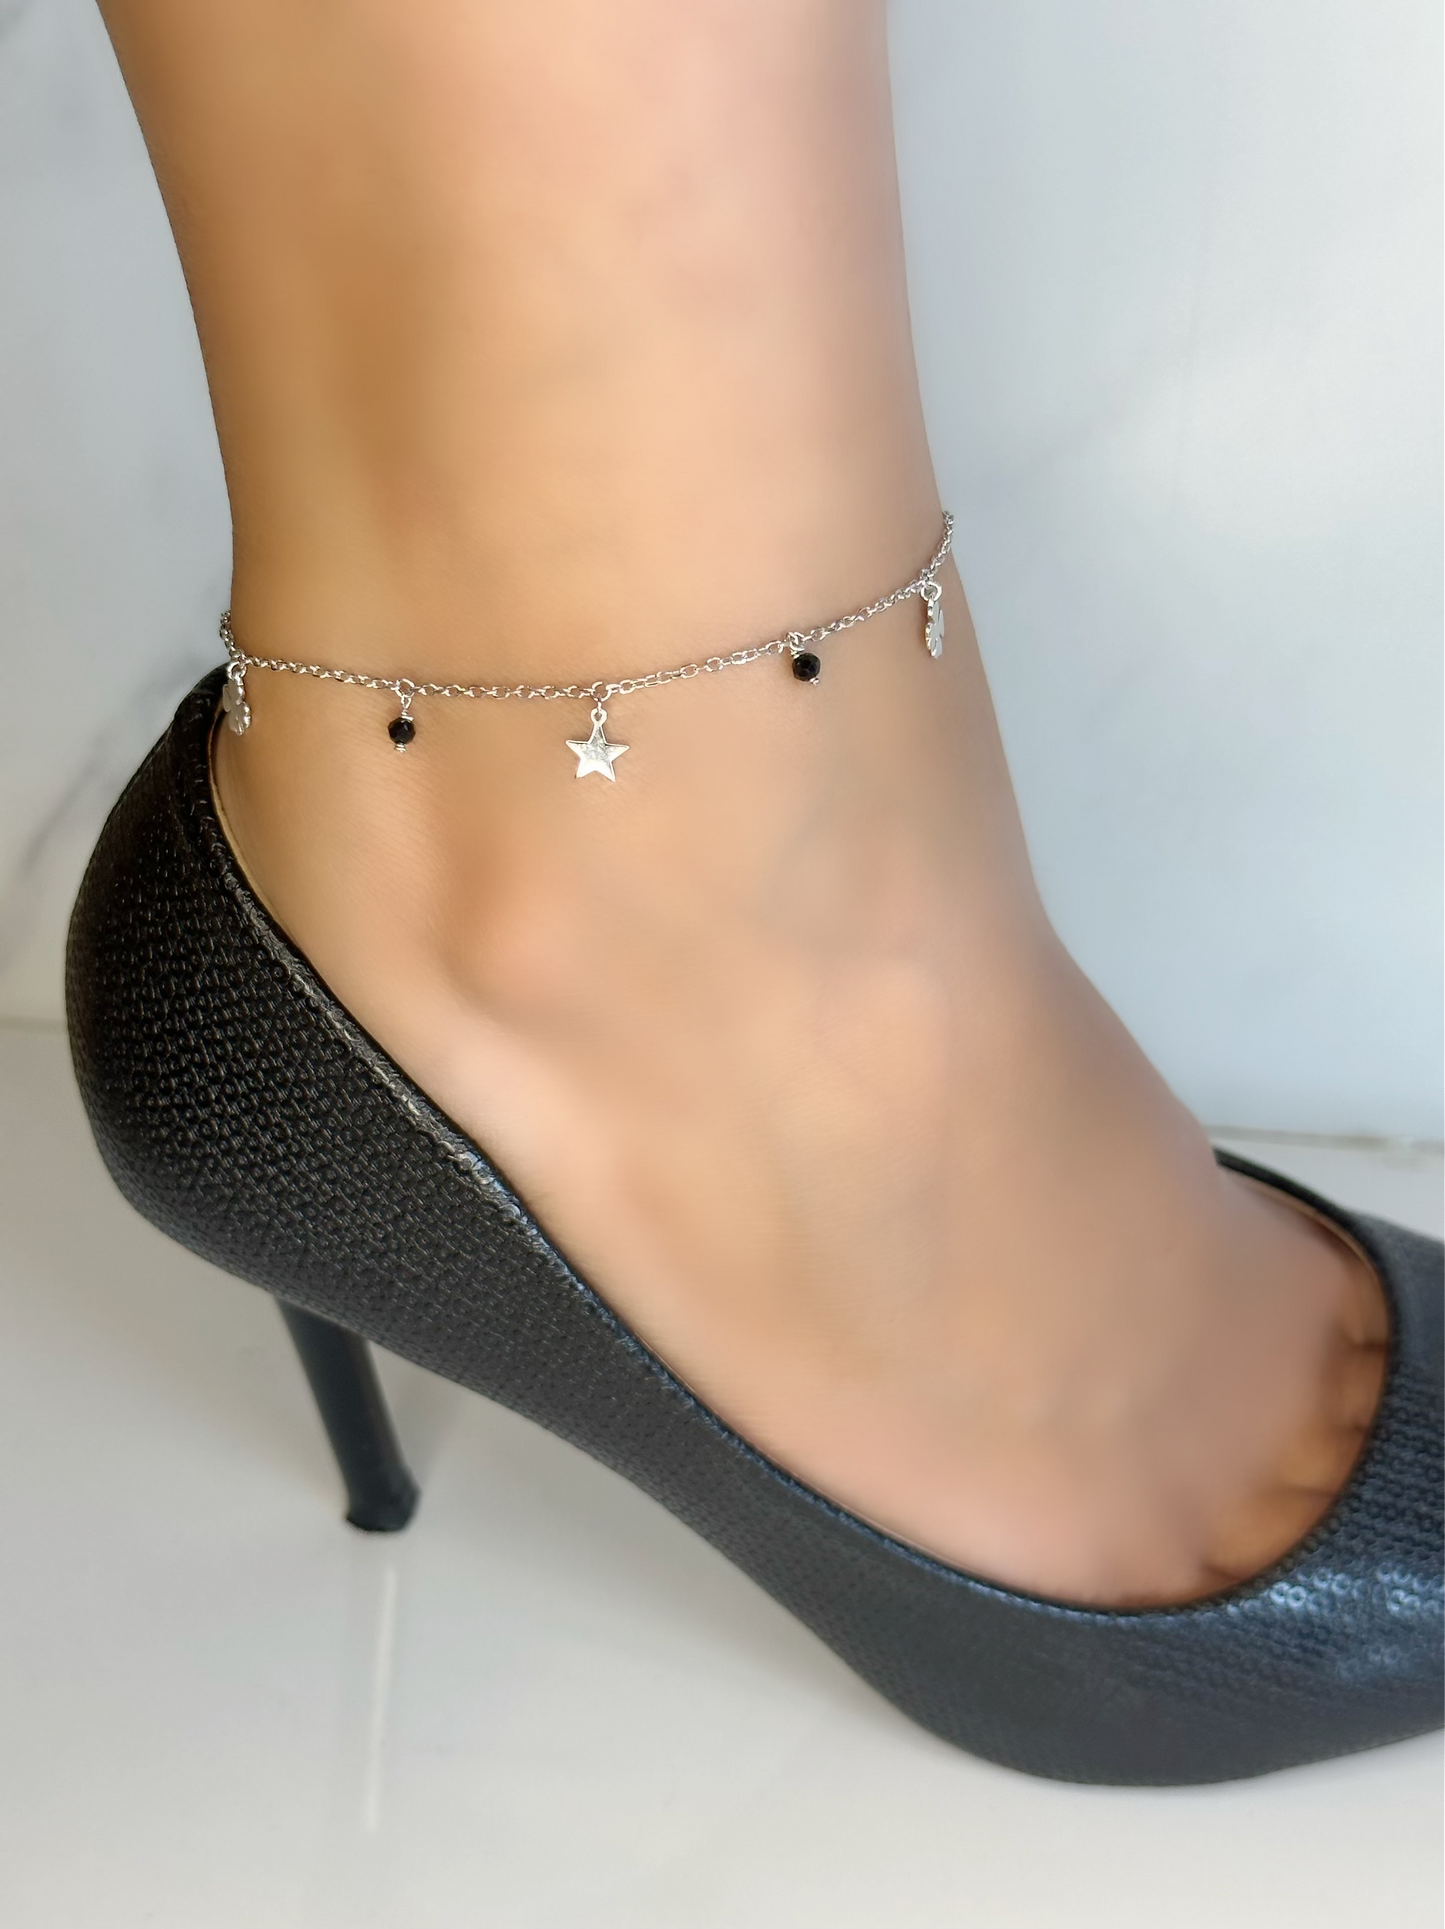 Star & Flower Anklet With Blue or Black Beads